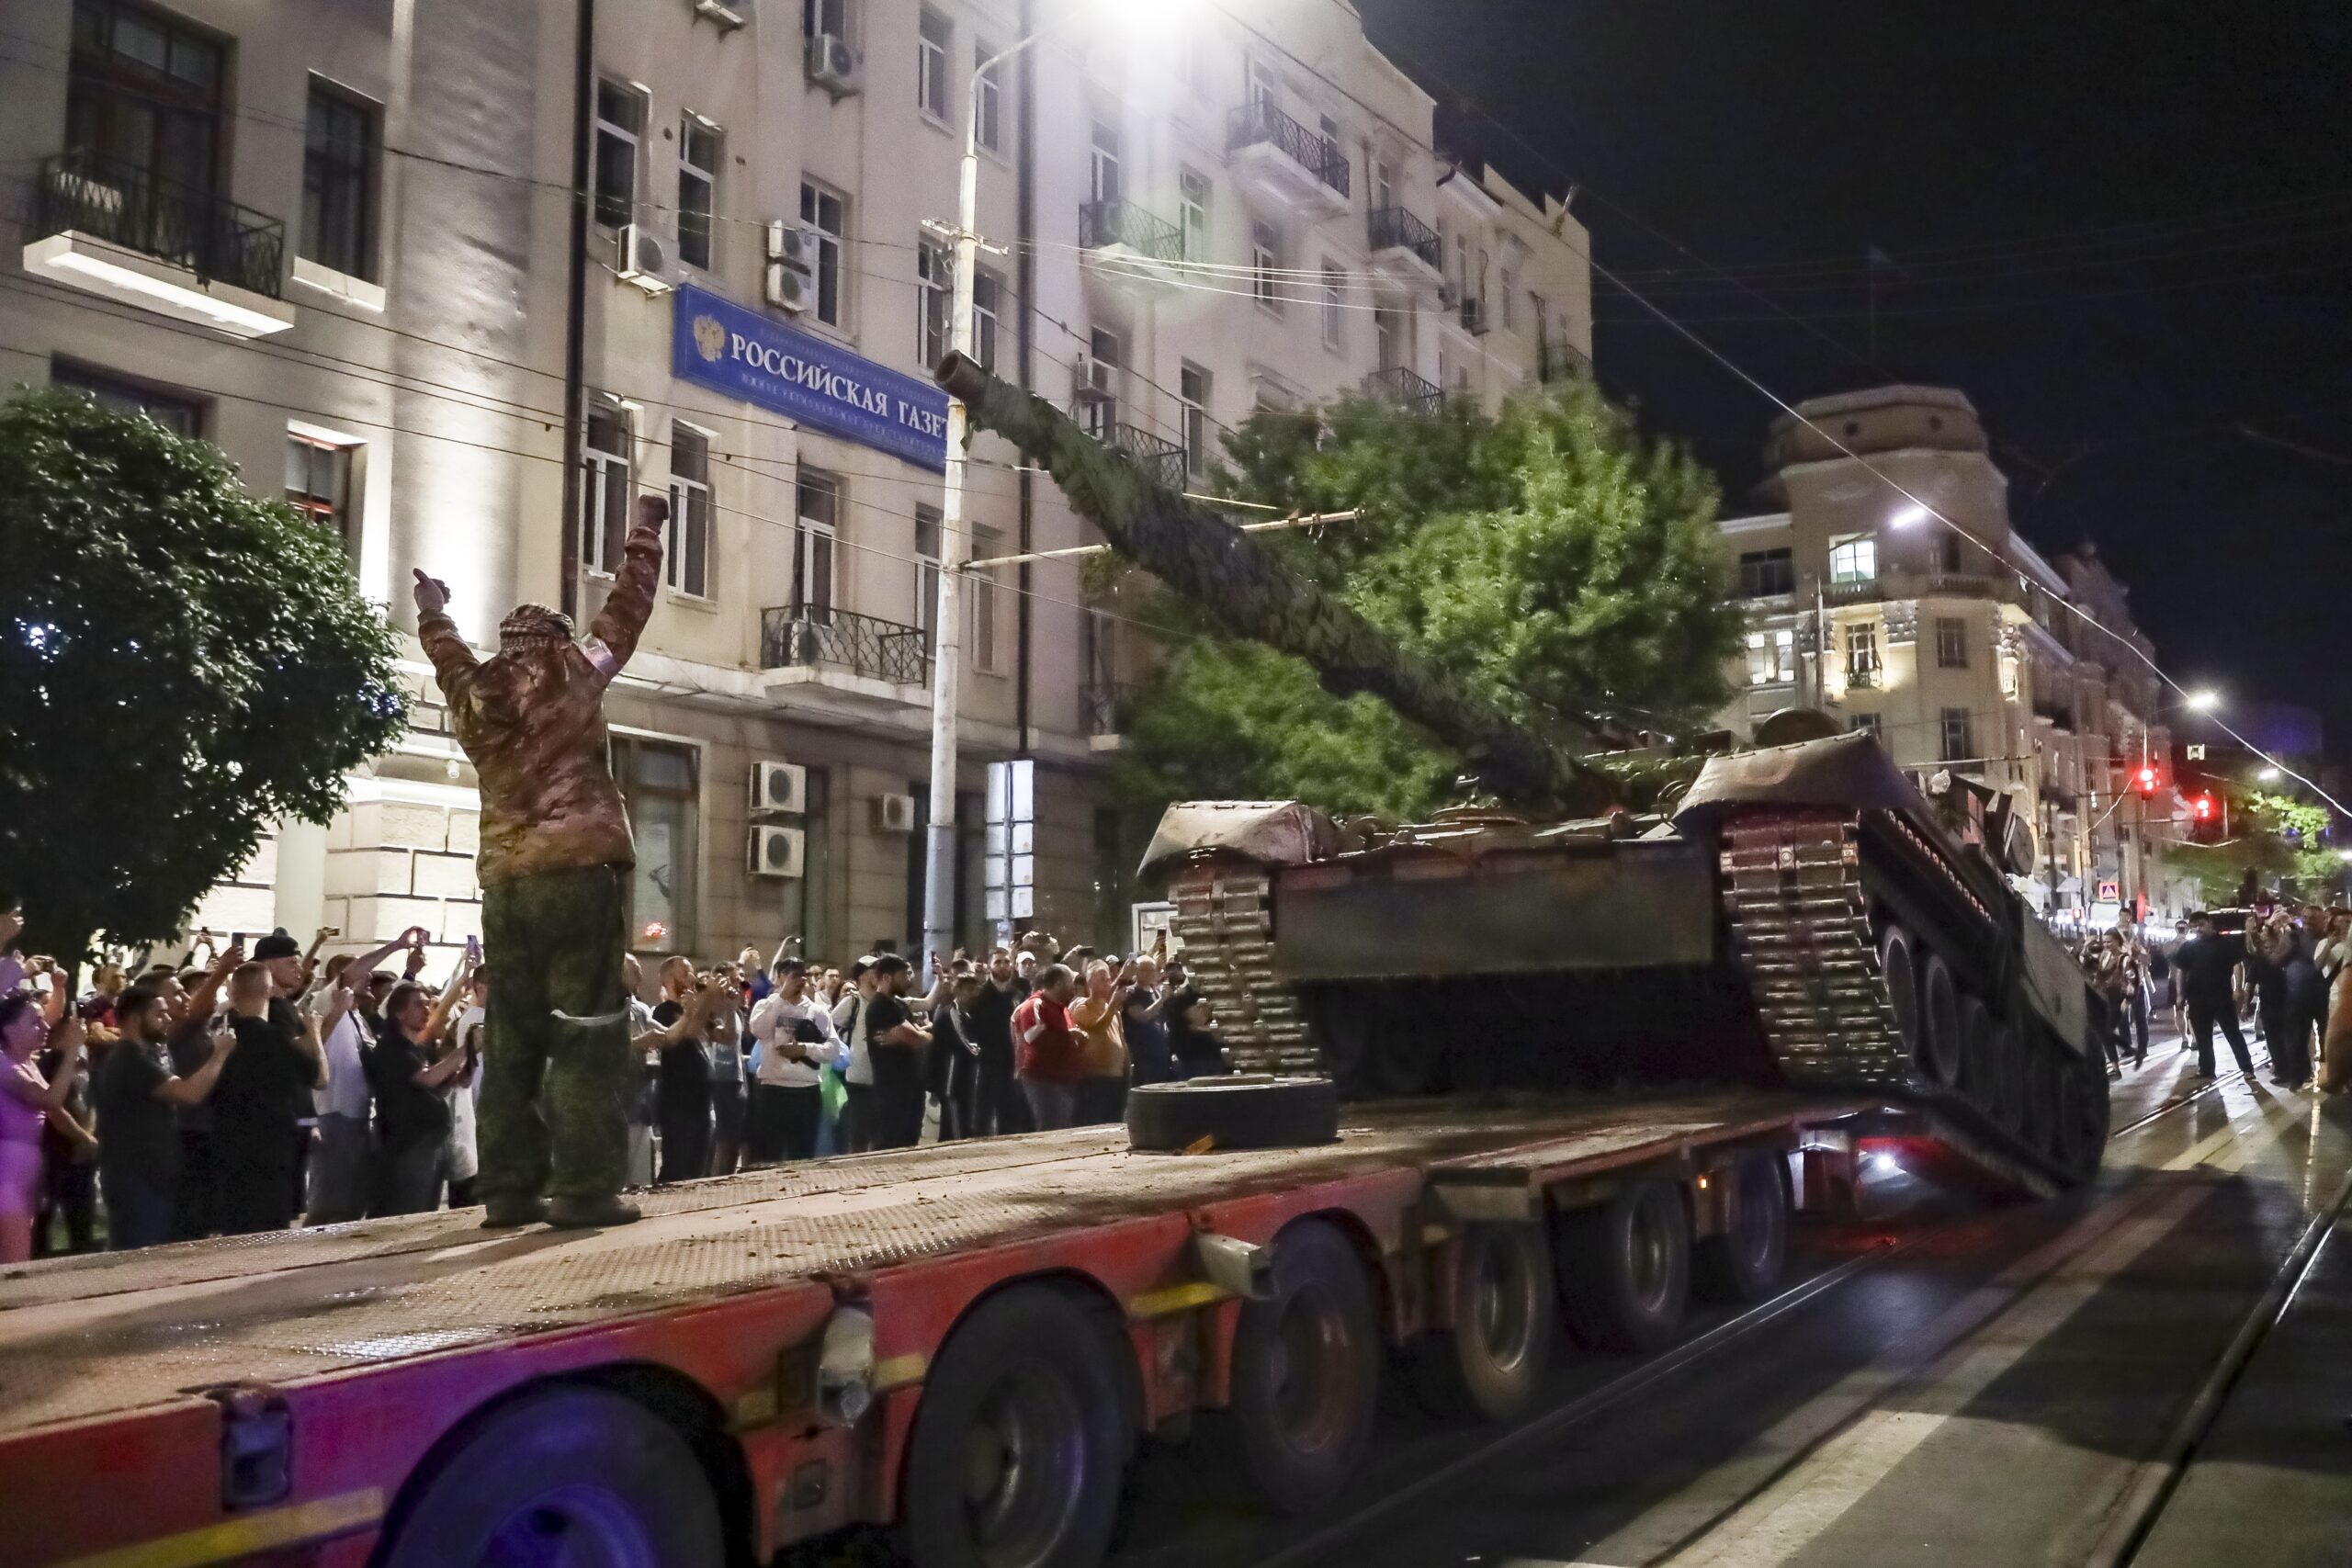 FILE - Members of the Wagner Group military company load their tank onto a truck on a street in Ros...